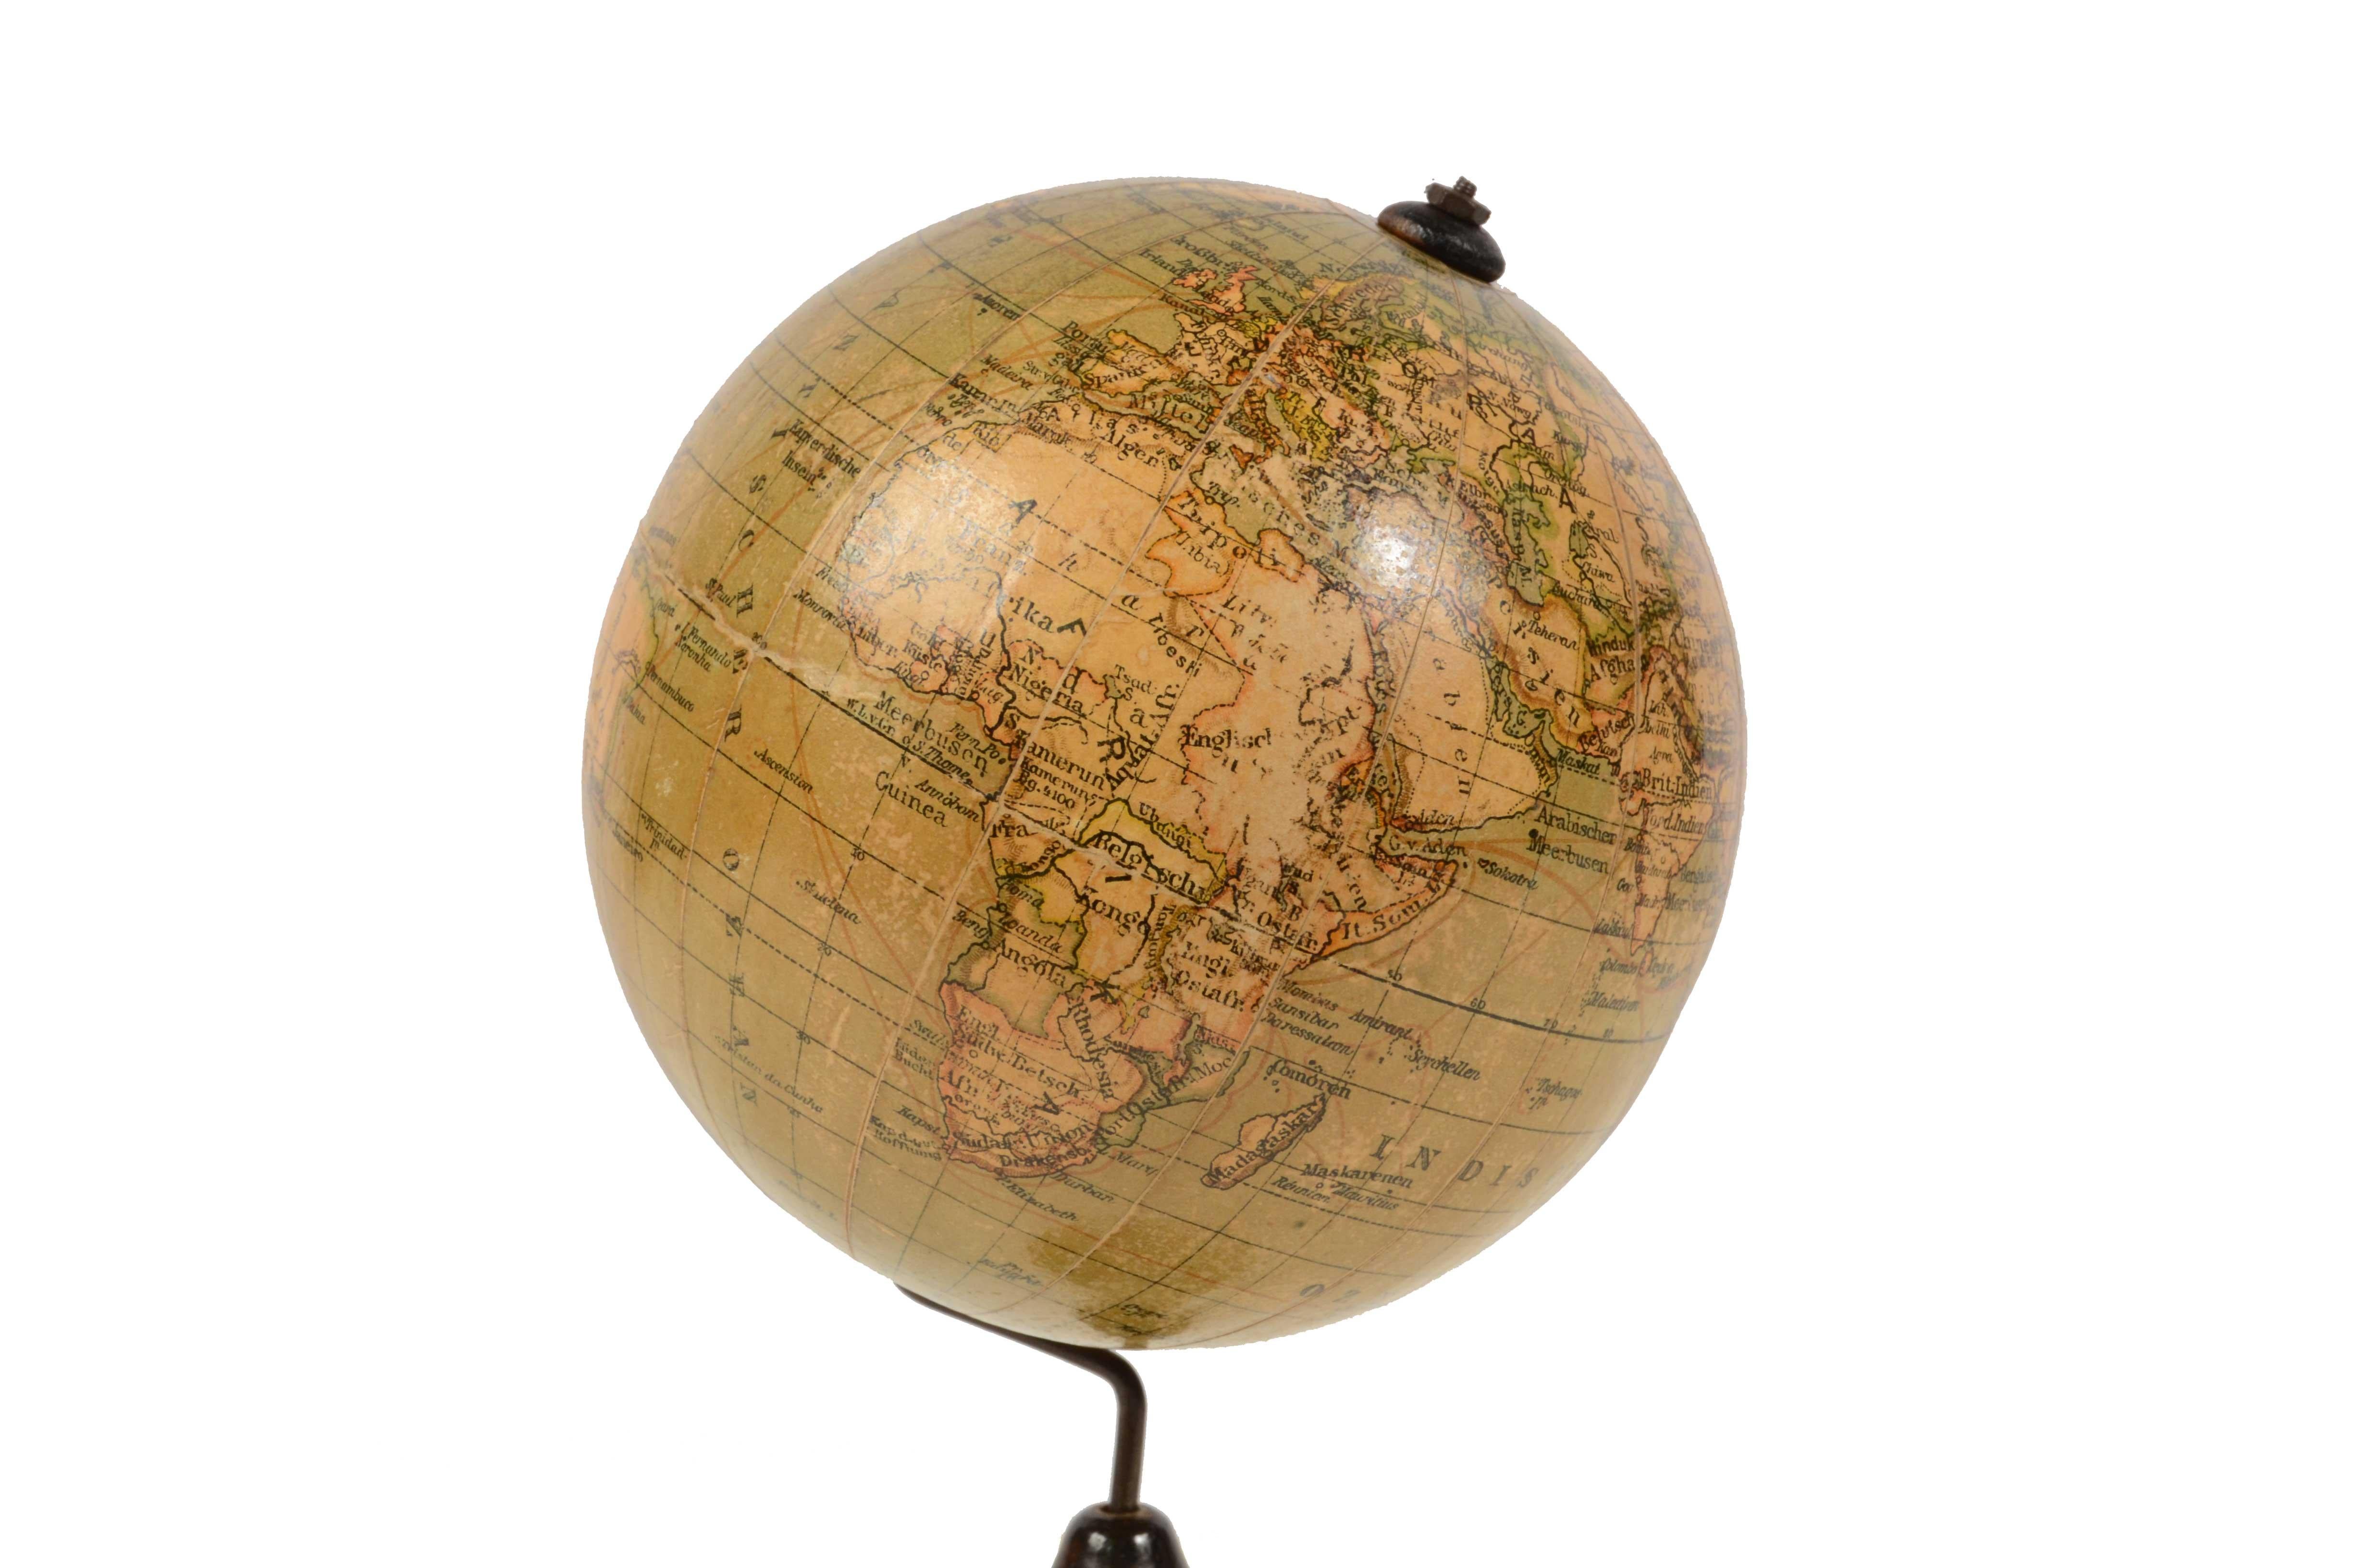 Terrestrial globe edited by Prof. Arthur Krause the German geographer, end of the XIX century. There are territorial map and commercial routes. 
Turned wooden base, papier maché sphere covered by printed paper lunes. 
Good condition. Height cm 28 -